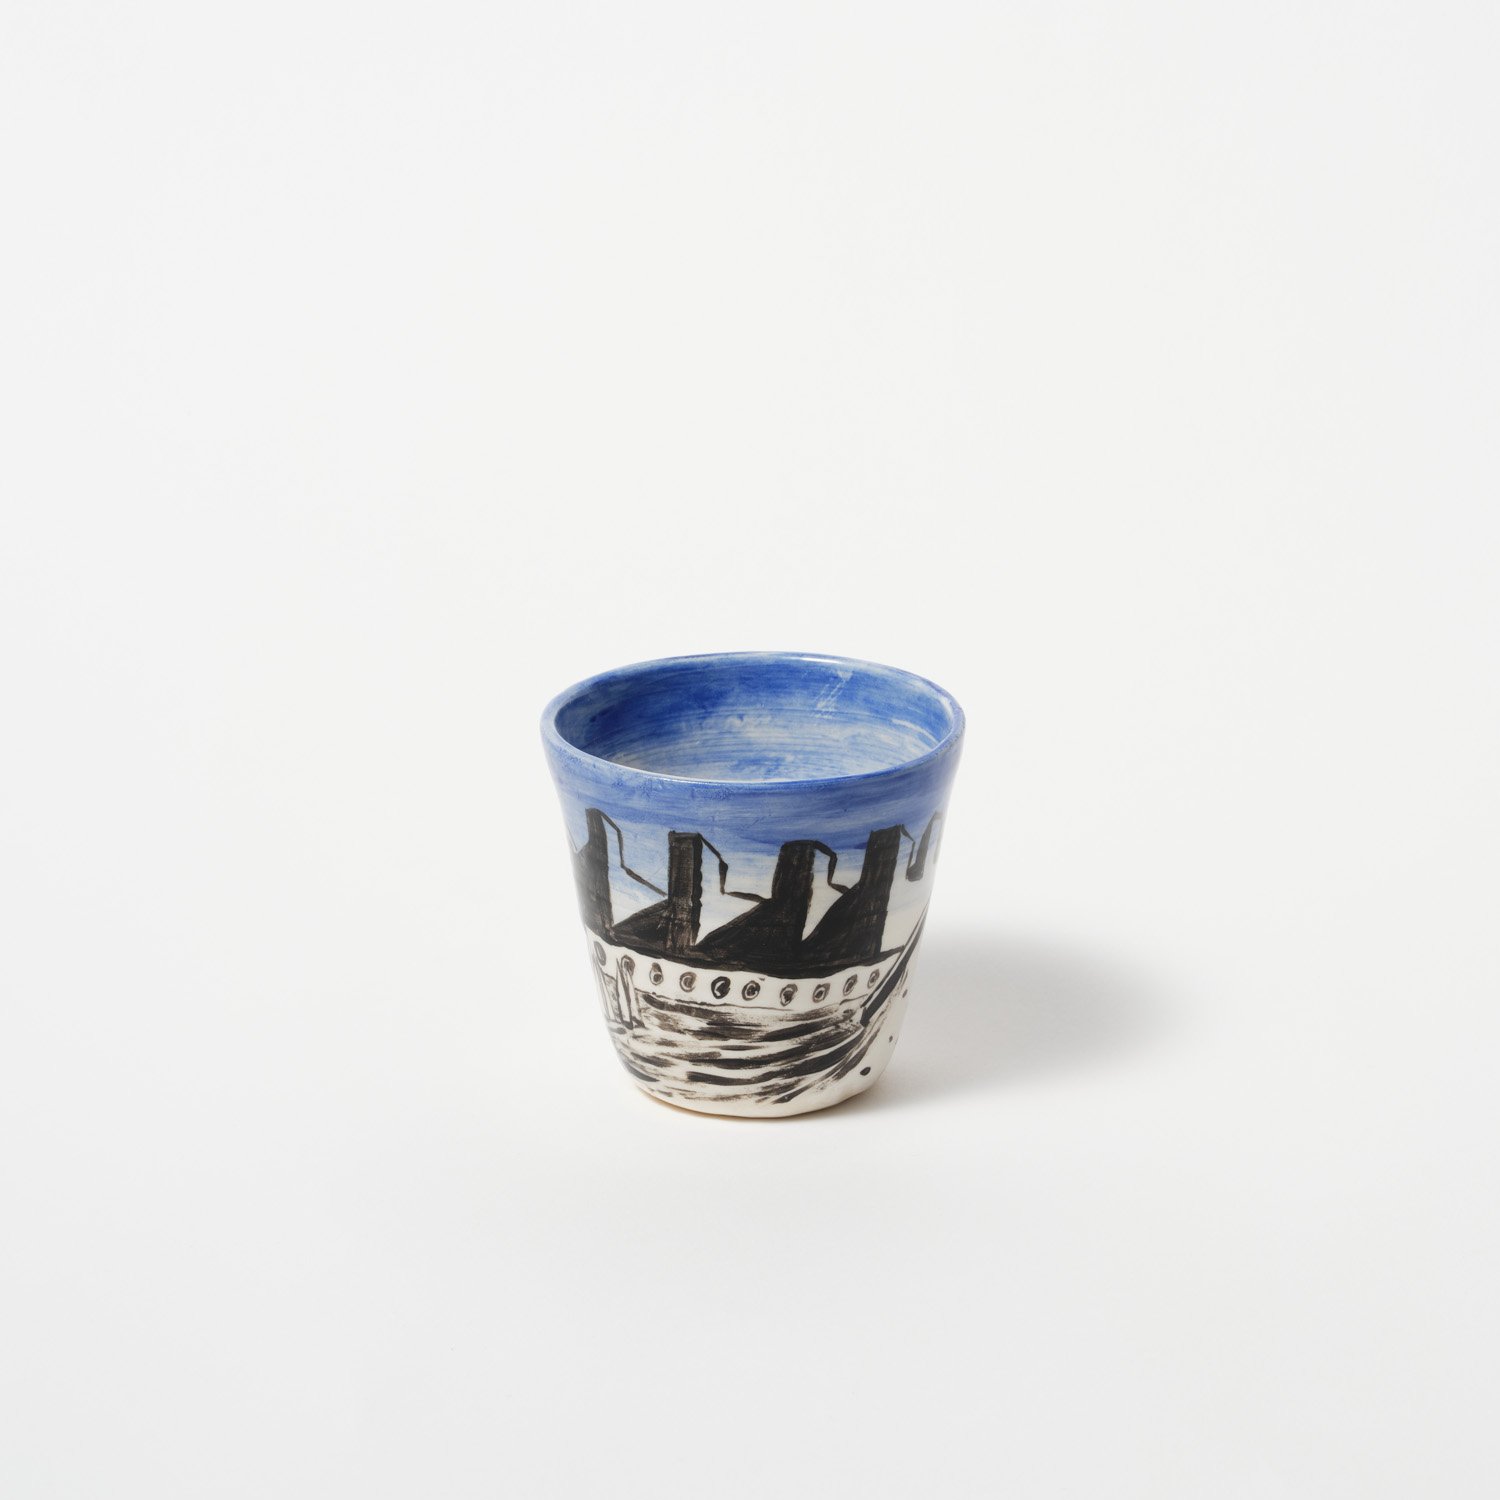 The Towers of Badalona Spain – Small Ceramic Cup - 9cm x 9cm x 5cm - $80 ($150 for pair)  